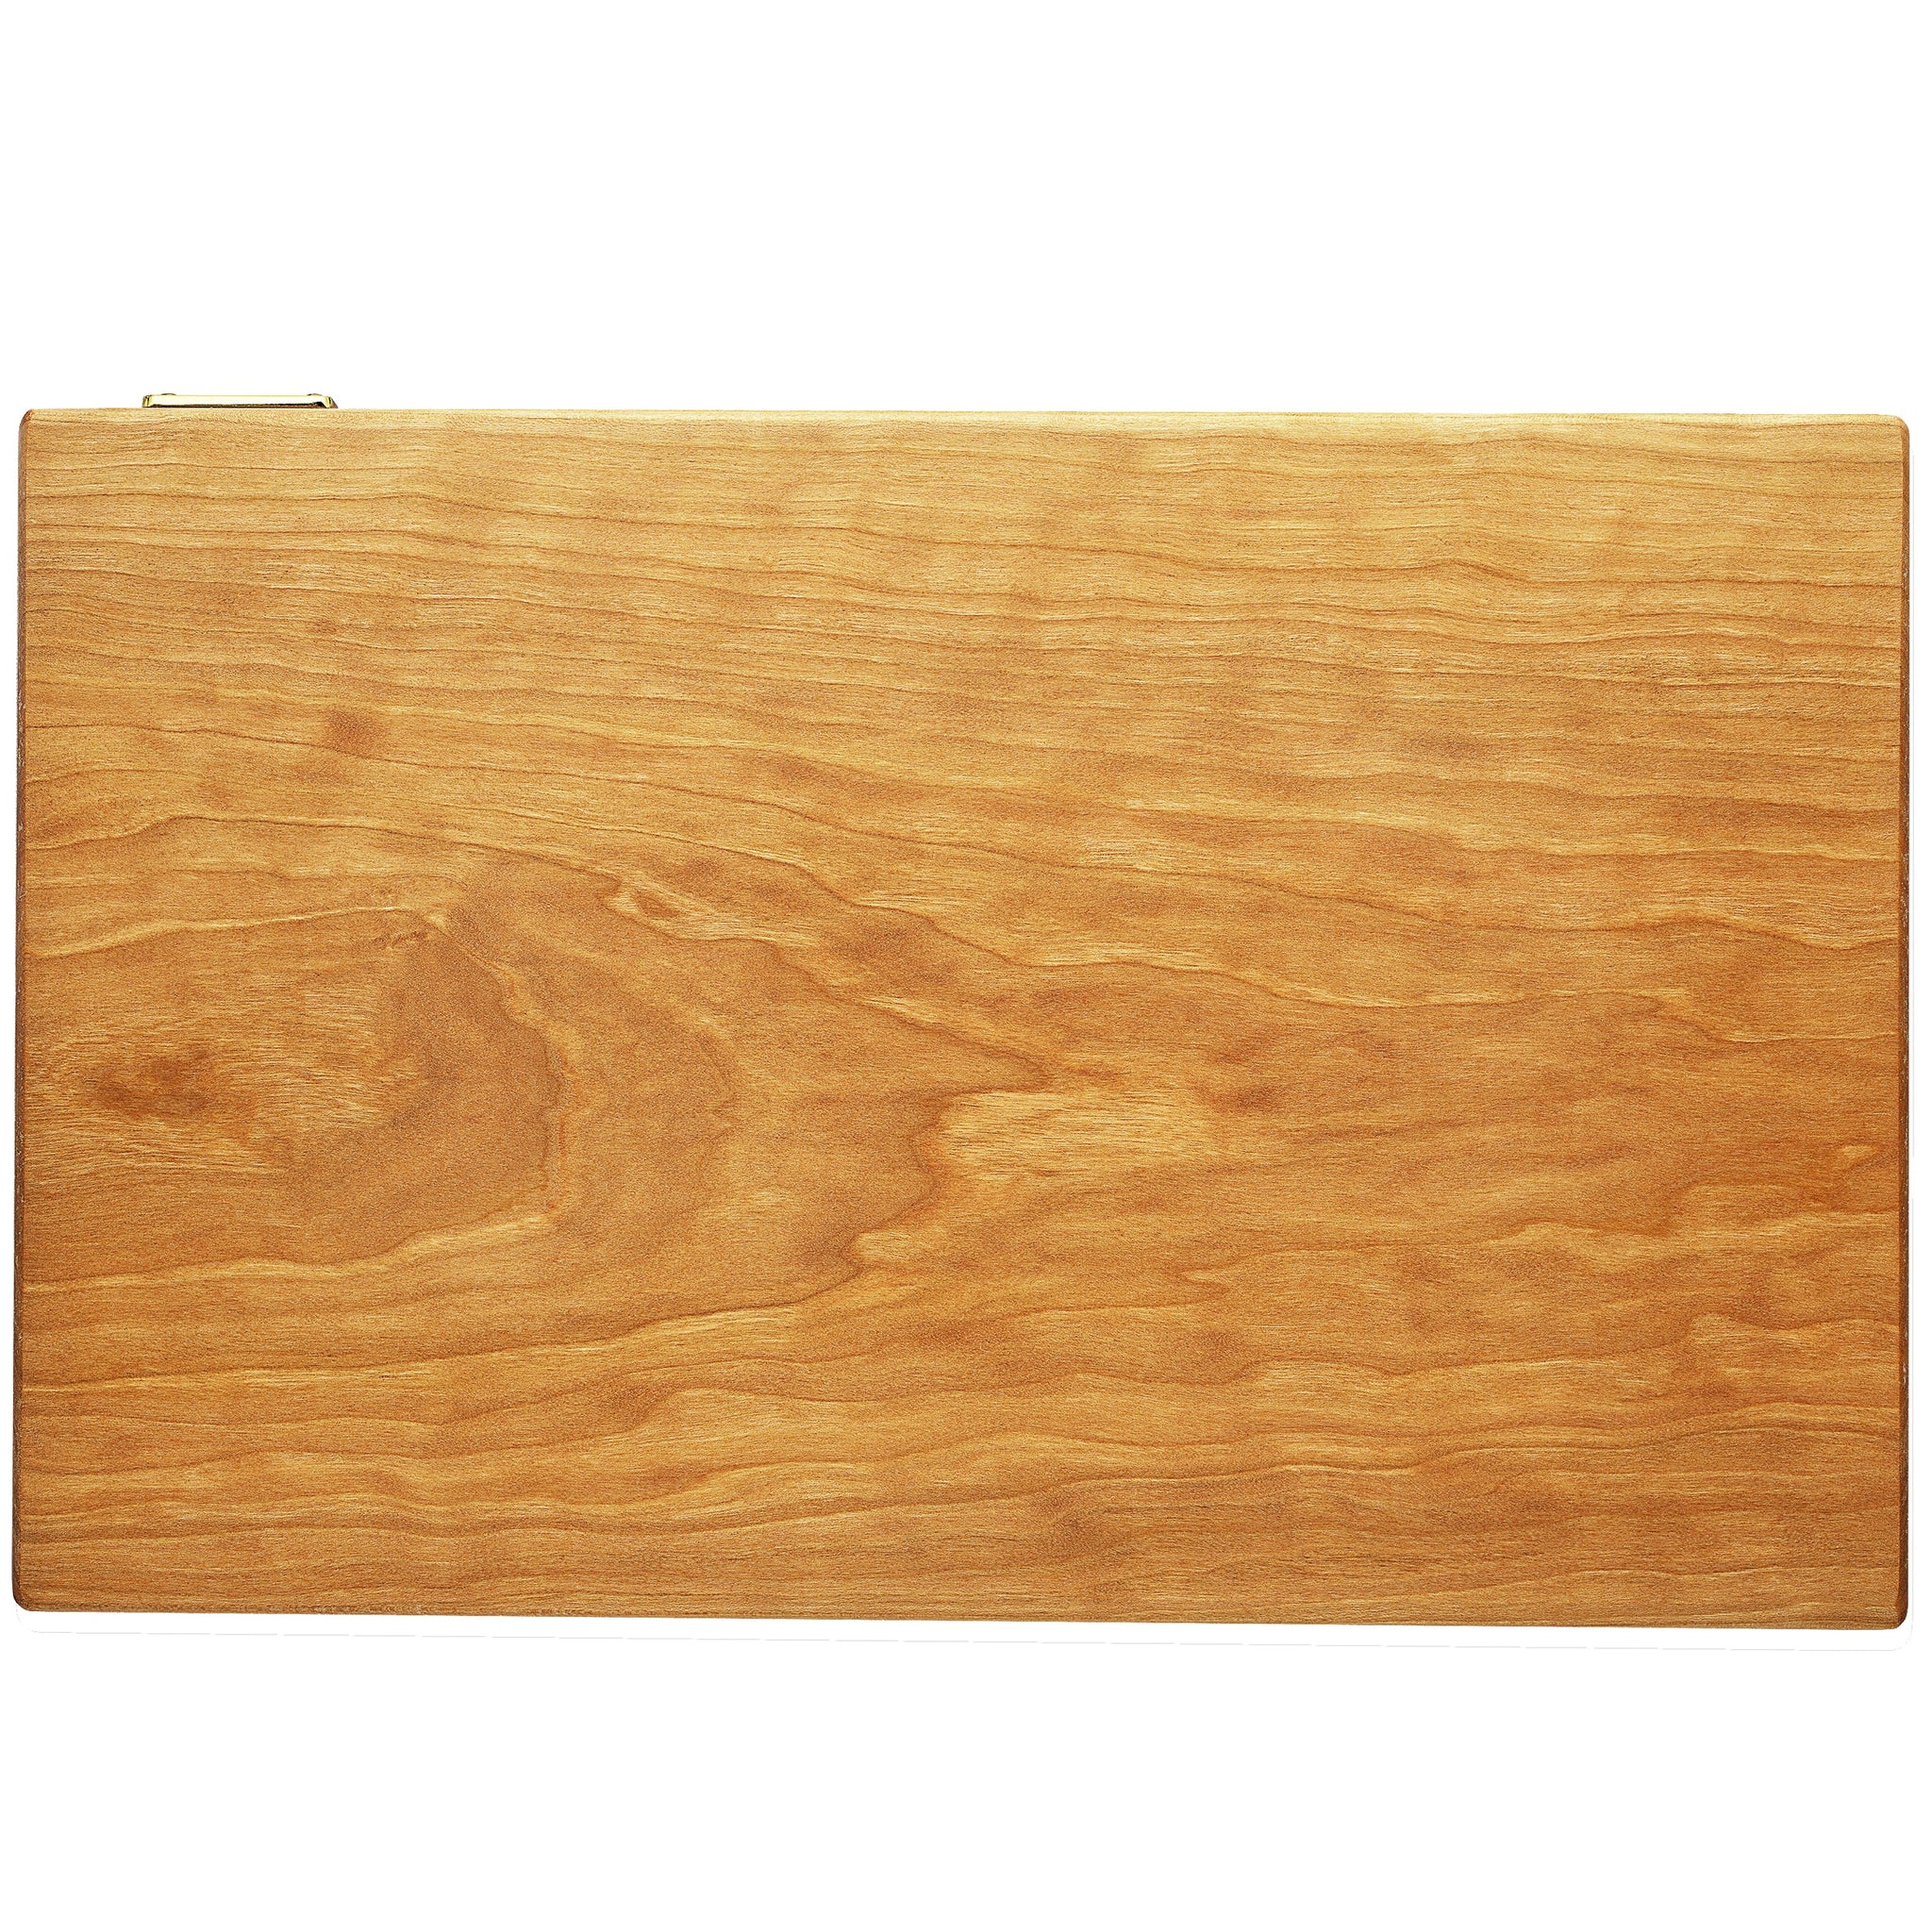 Reversible Cutting Board Prime II Cherry Wood Edge Grain Handmade 15" x 10" x 1-1/4" (Mother's Day Special)